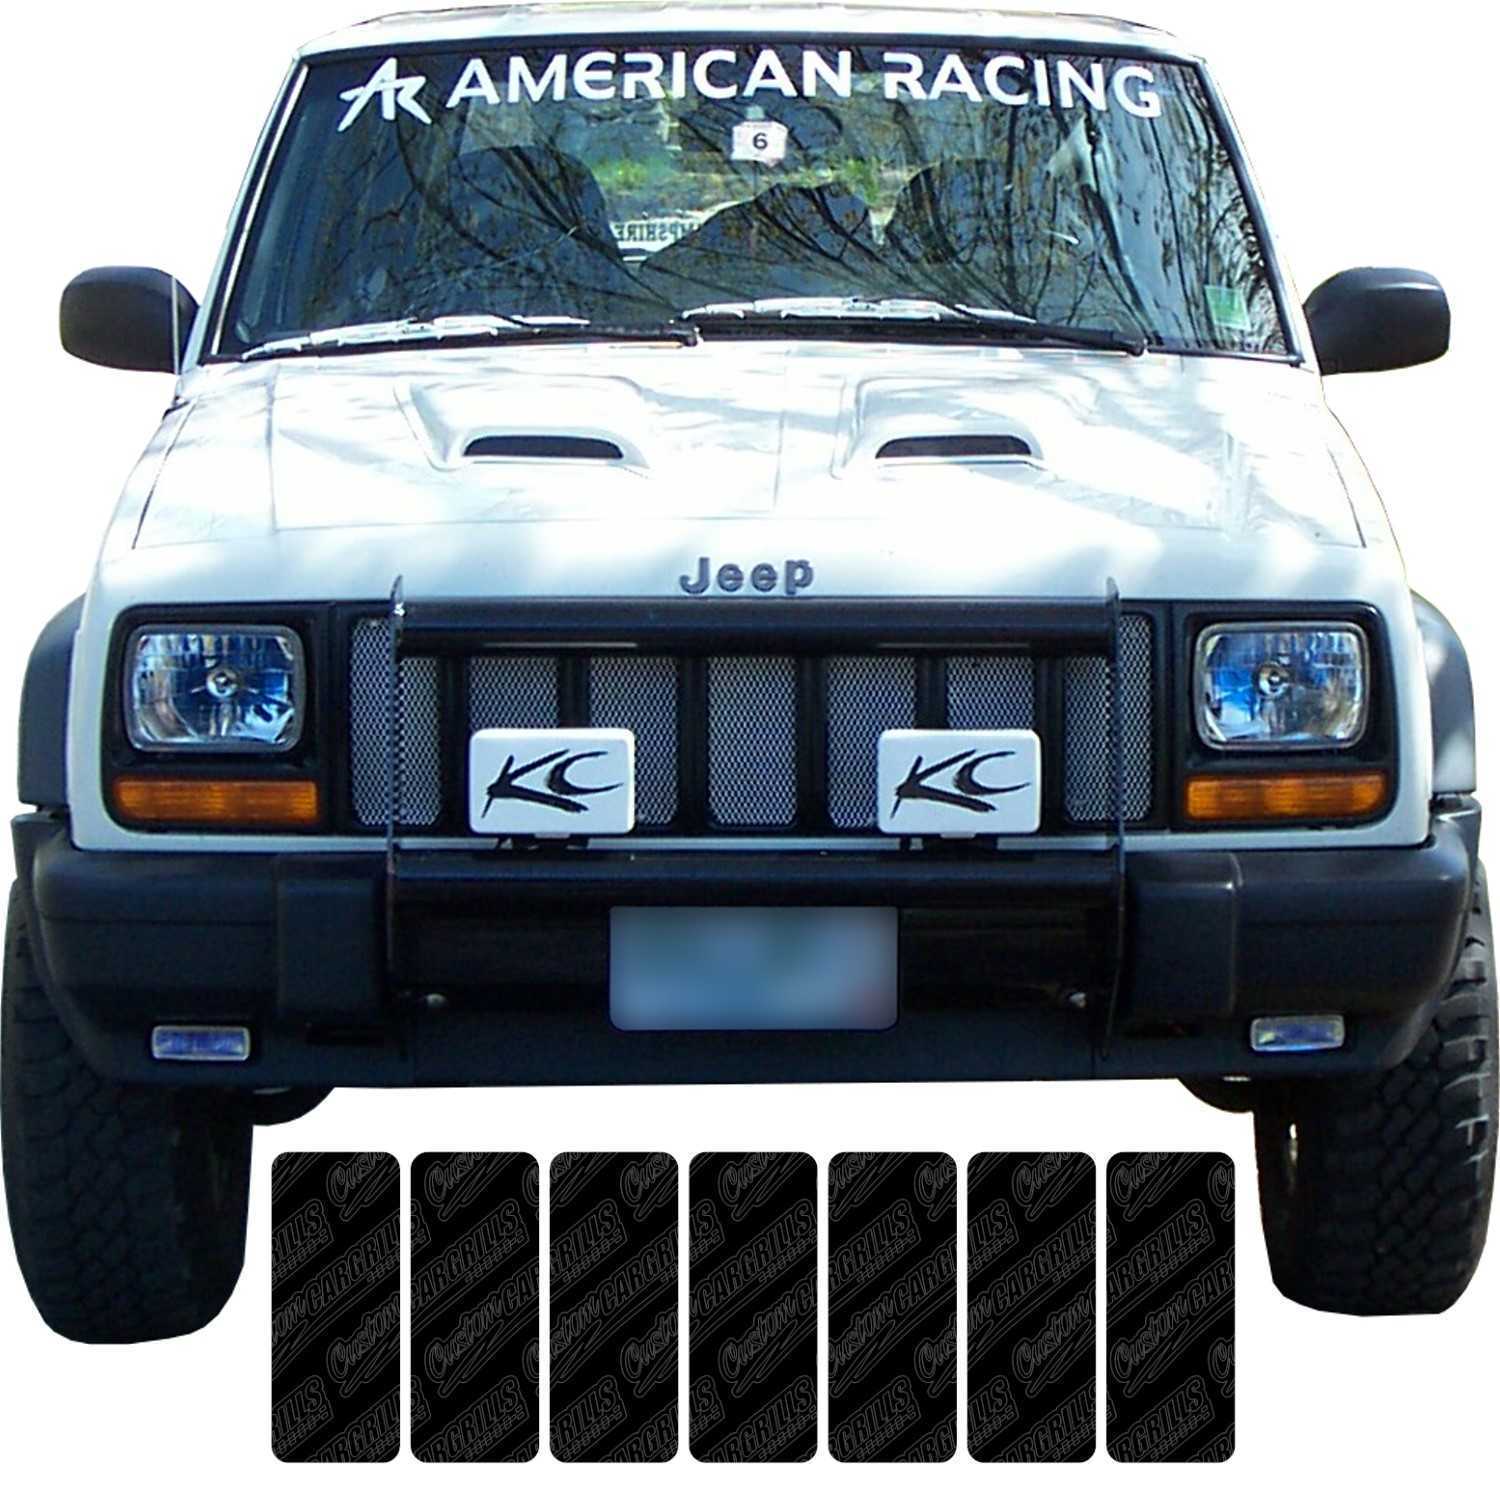 1997 - 2001 Jeep Cherokee Mesh Grill Template